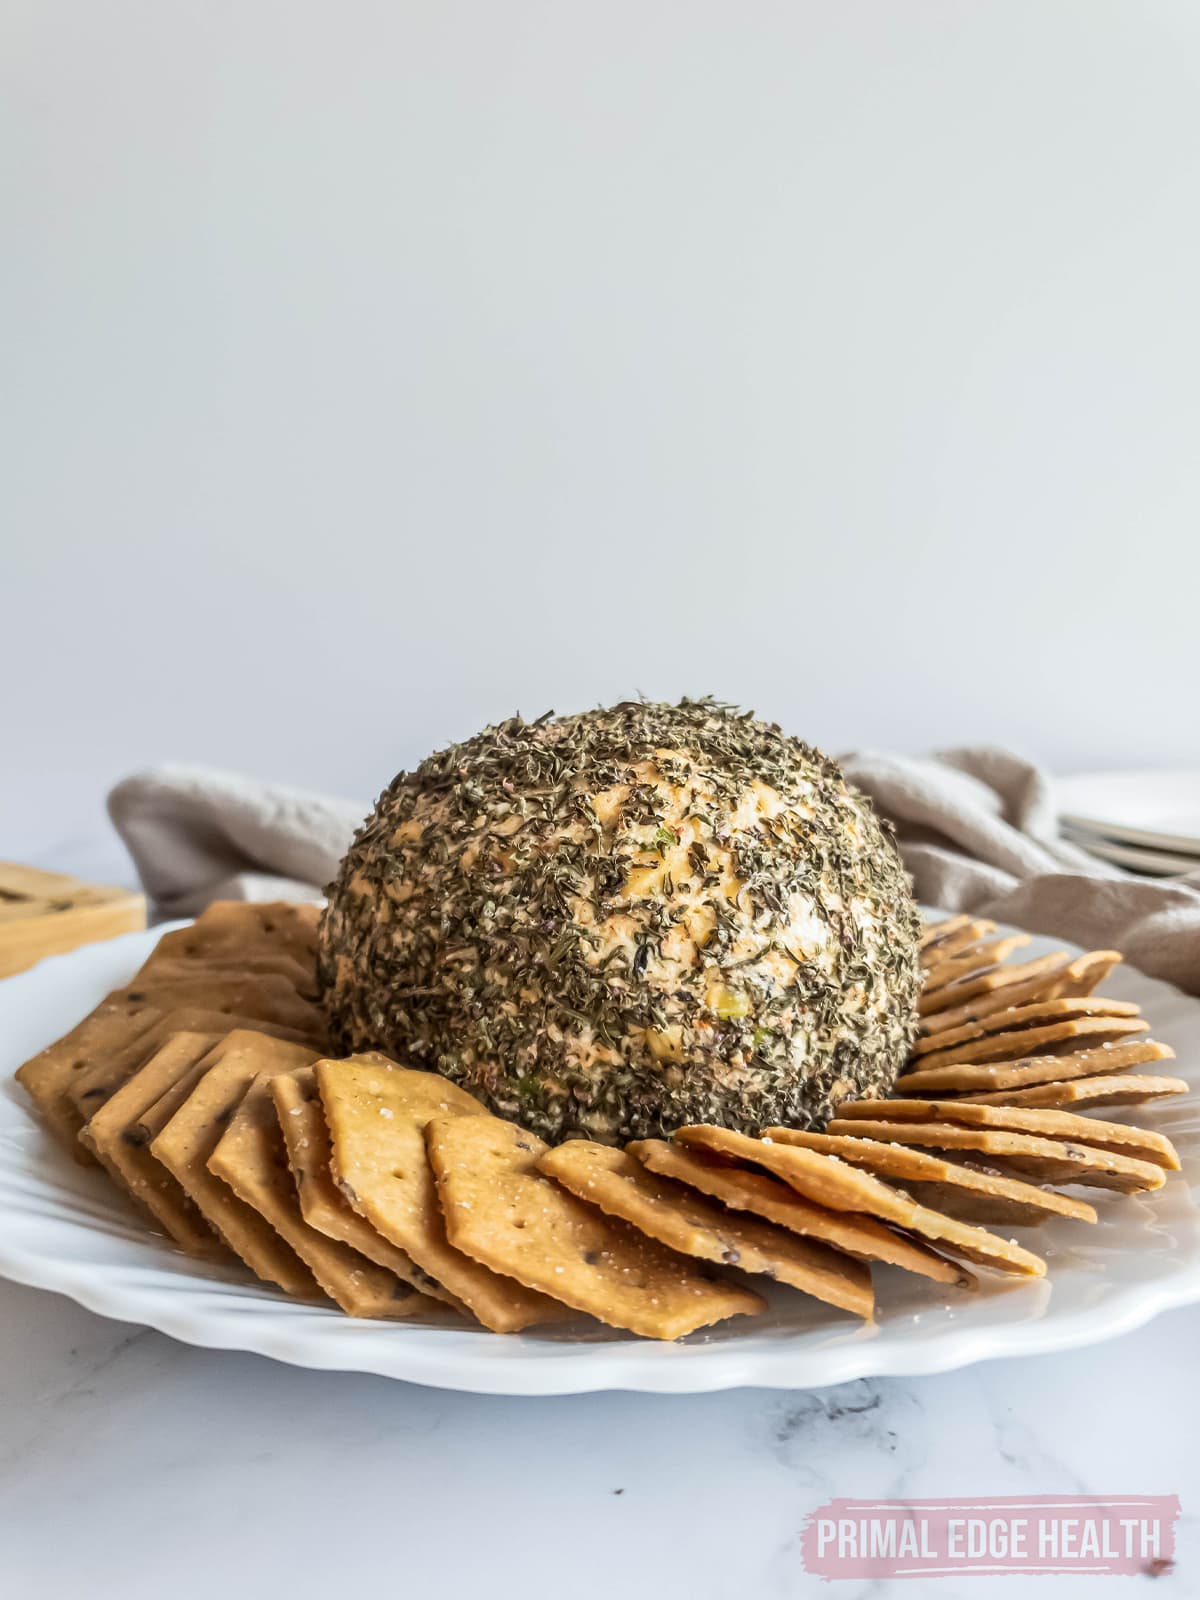 Herb coated cheese ball on white serving plate surrounded by crackers.